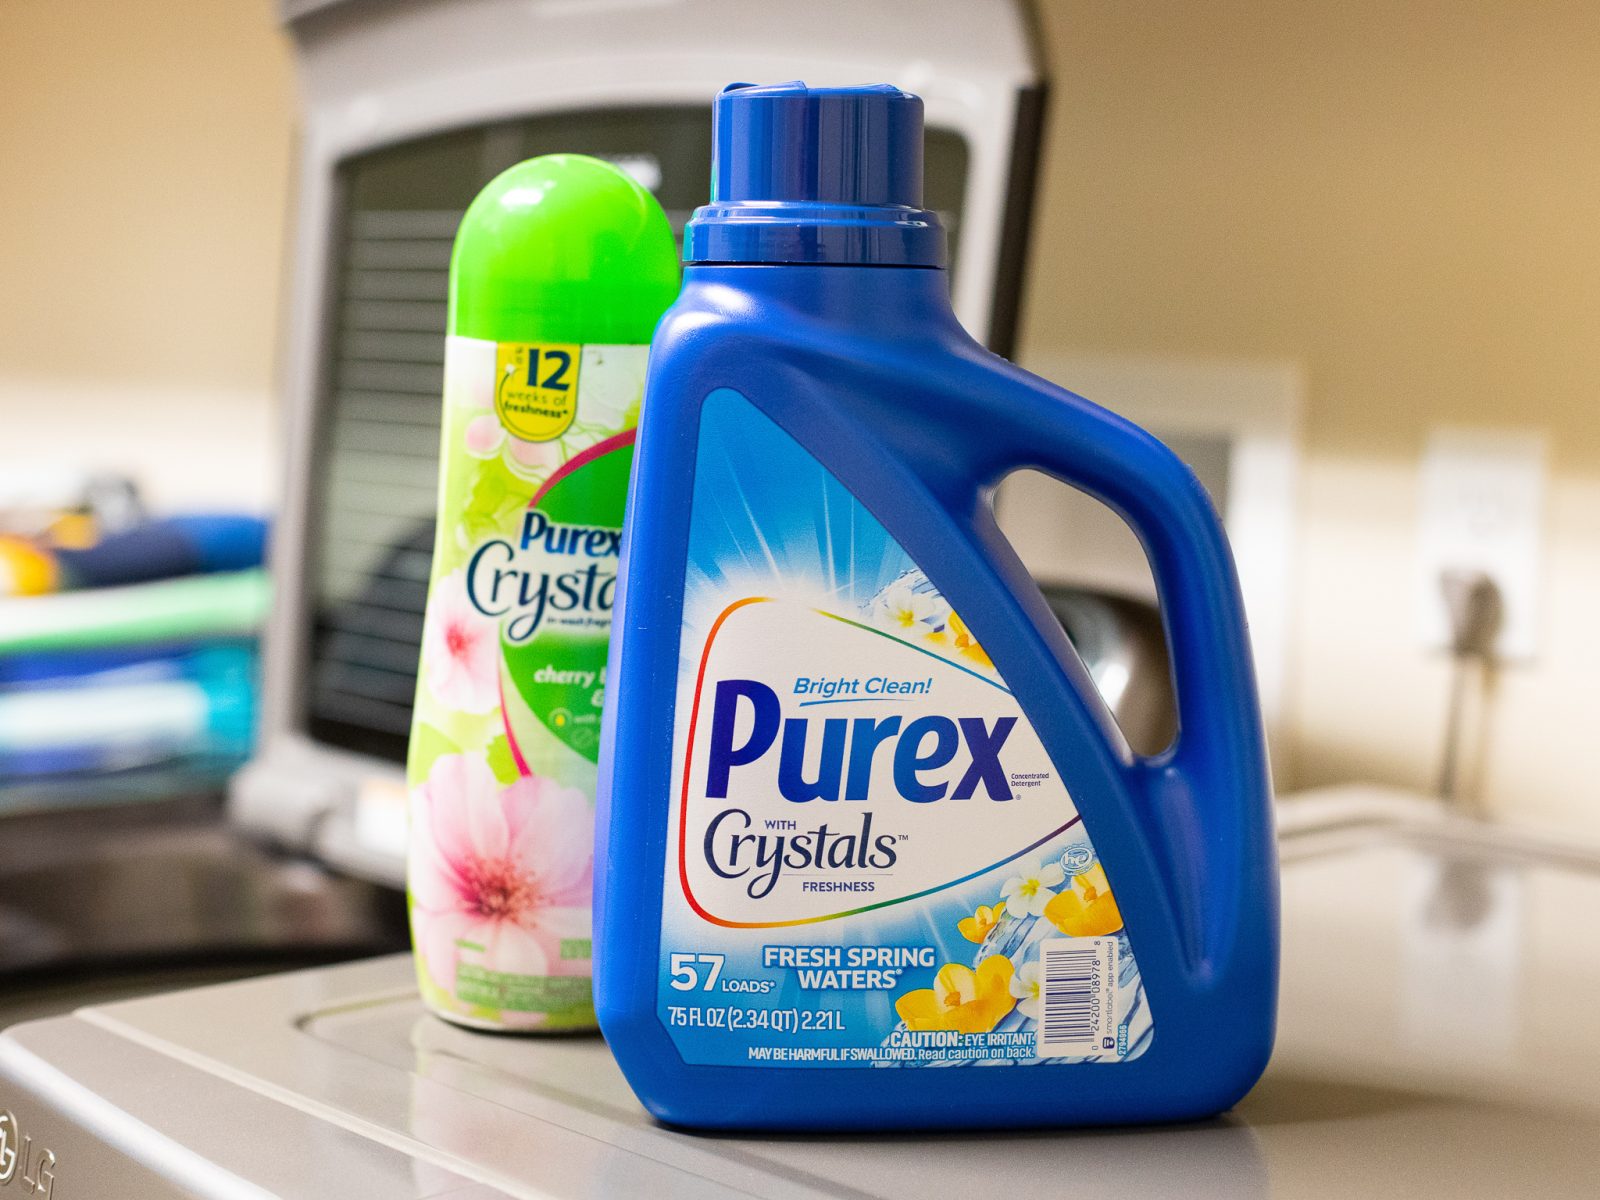 Get Purex Liquid Laundry Detergent As Low As $1.99 At Kroger